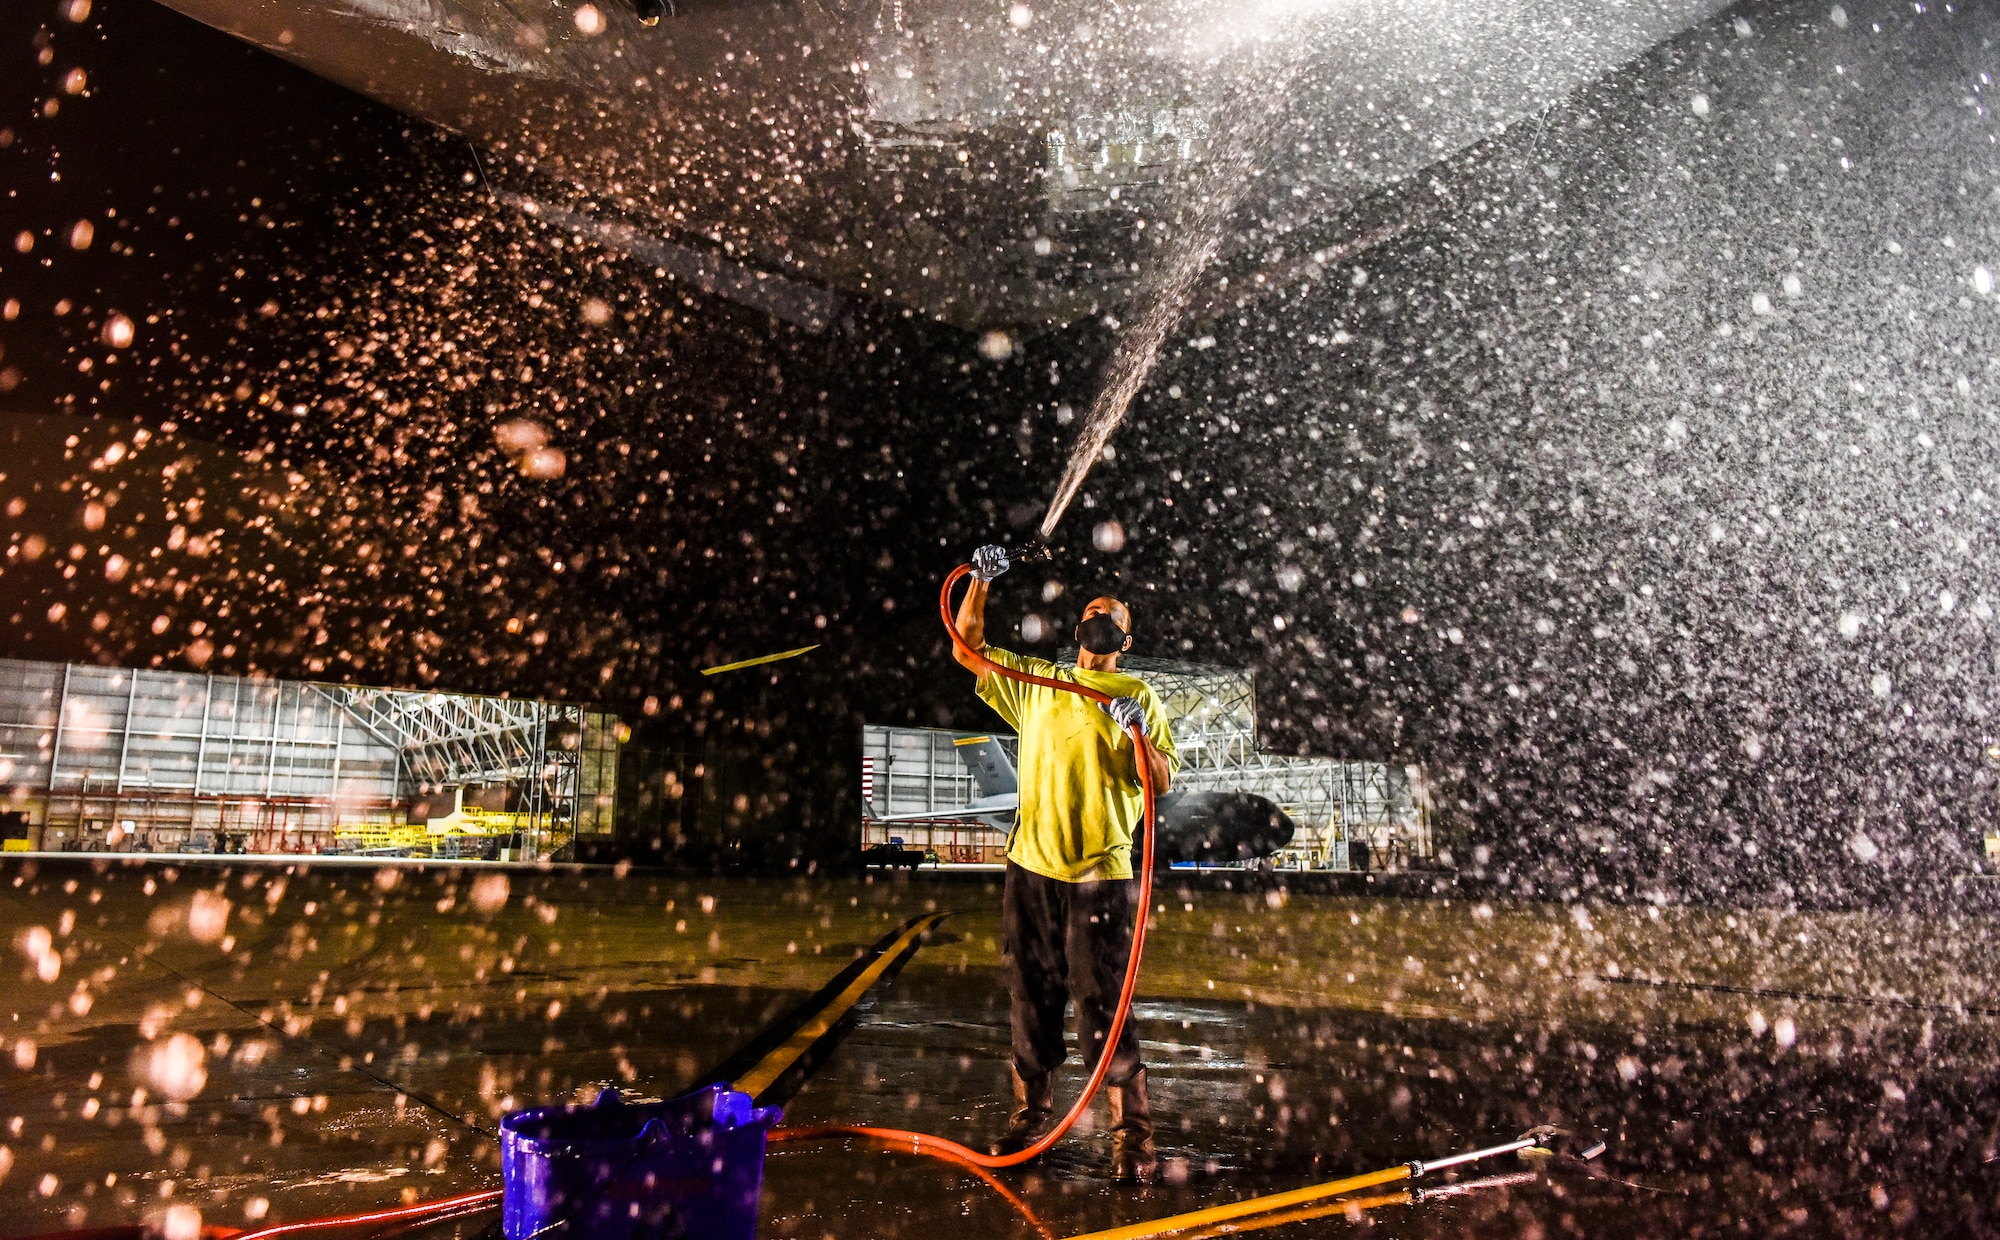 A contractor with the 15th Aircraft Maintenance Squadron rinses off soap from under a U.S. Air Force C-17 Globemaster III  at Joint Base Pearl Harbor-Hickam, Hawaii, Jan. 7, 2020.